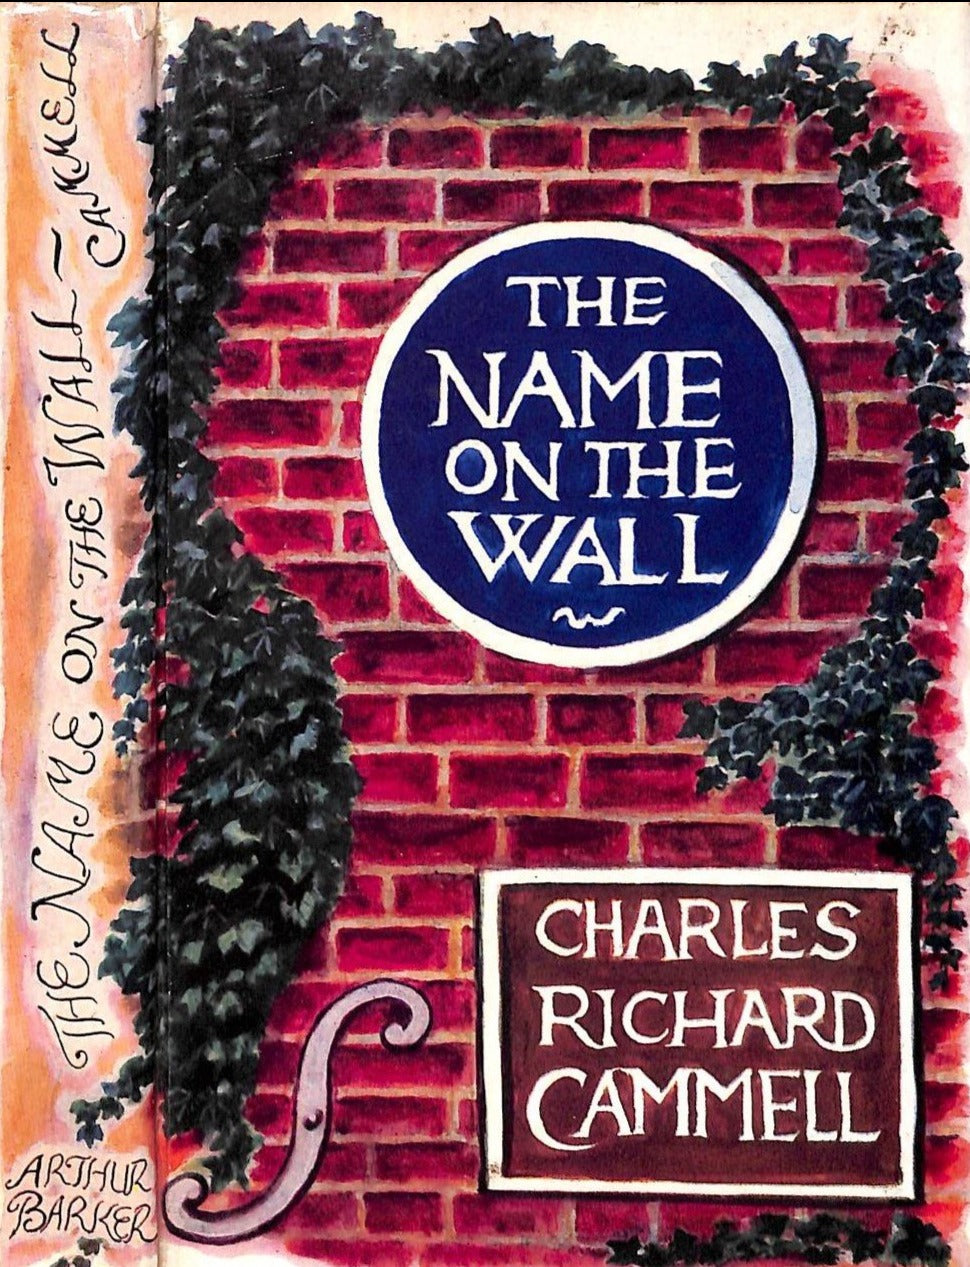 "The Name On The Wall" 1960 CAMMELL, Charles Richard